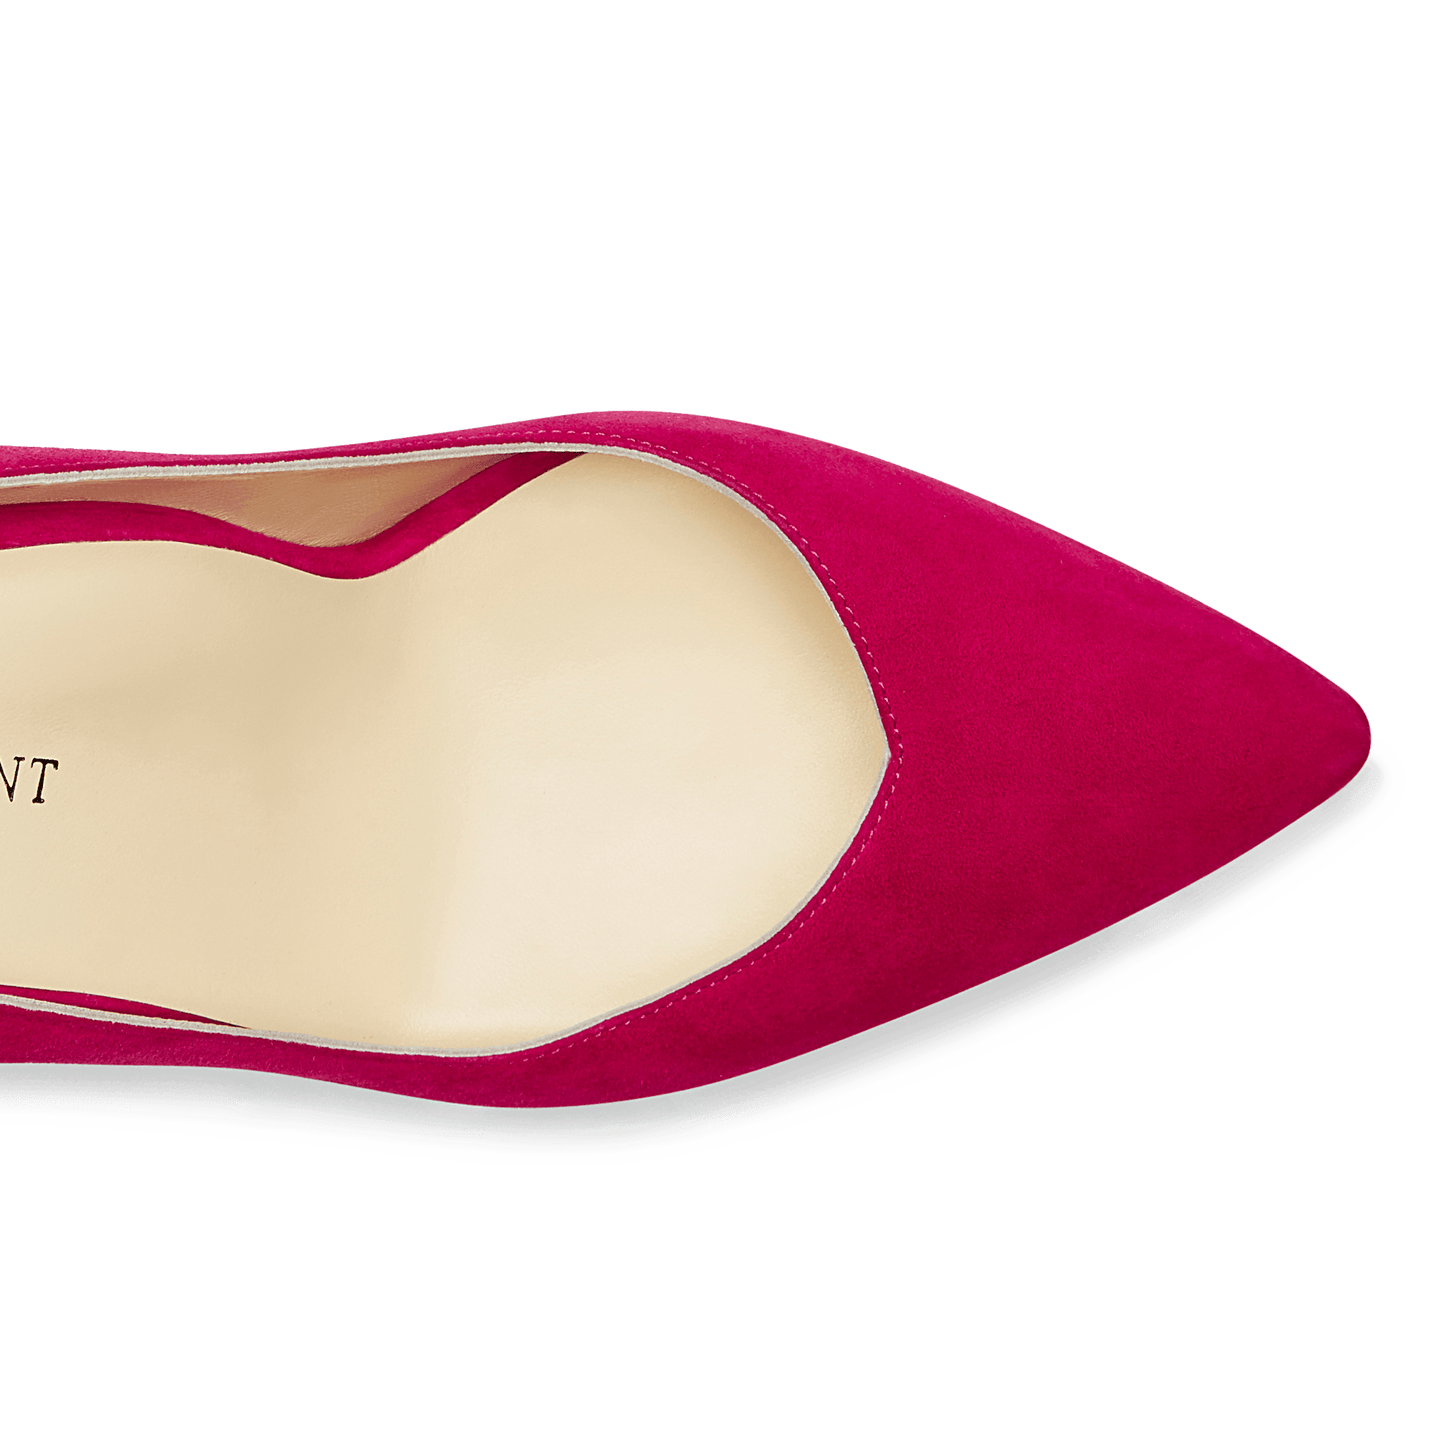 50mm Italian Made Pointed Toe Pump in Pomegranate Suede